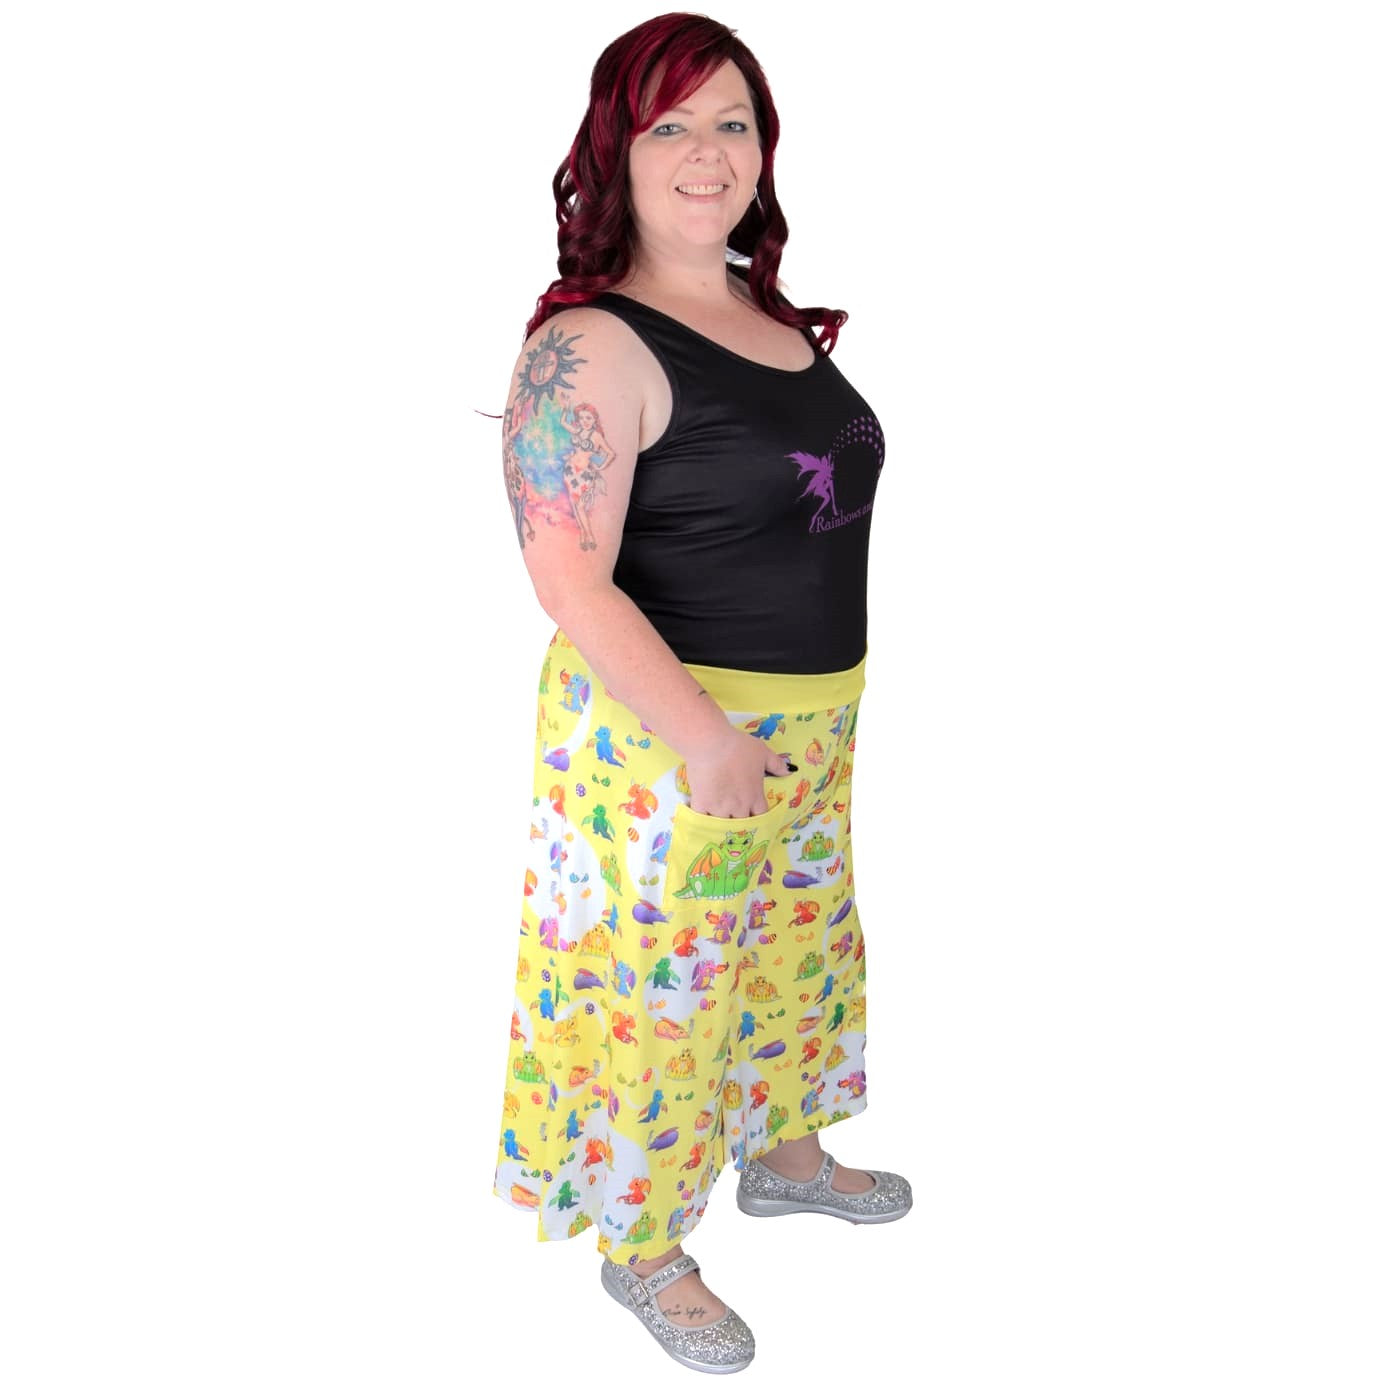 Brood Culottes by RainbowsAndFairies.com.au (Dragons - Vintage - Baby Dragon - Wide Leg Pants - Pokemon Inspired - 3 Quarter Pants - Kitsch) - SKU: CL_CULTS_BROOD_ORG - Pic-03